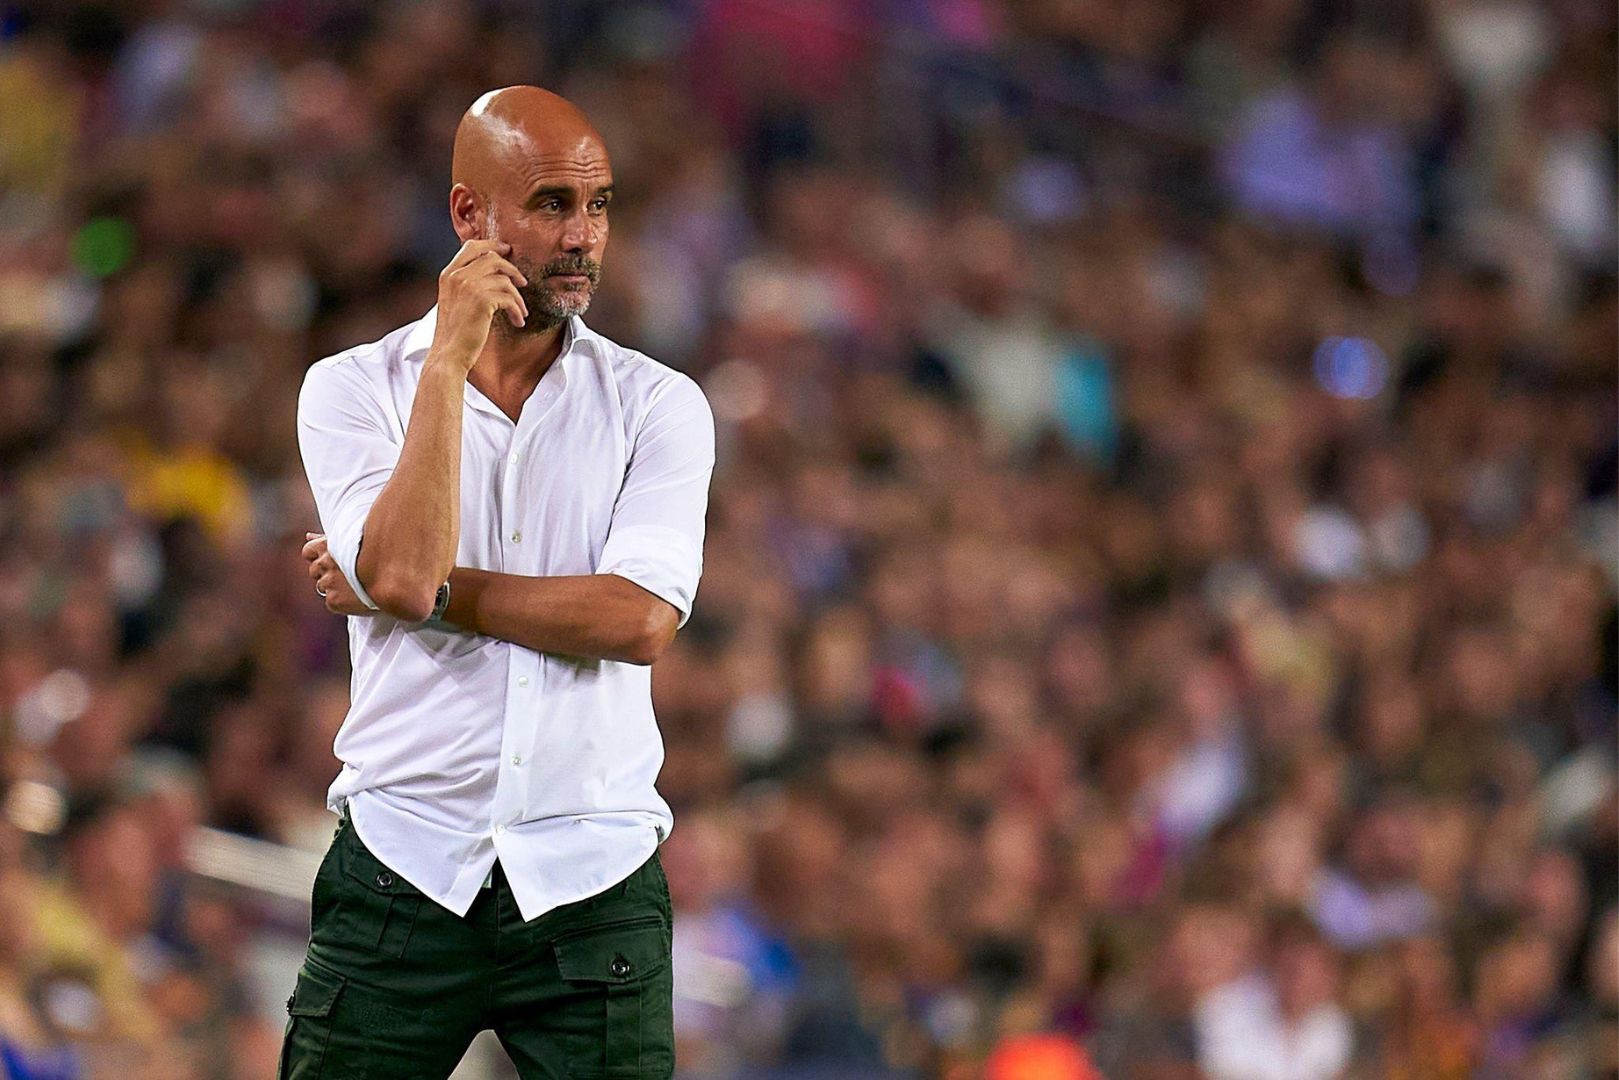 BARCELONA, SPAIN - AUGUST 24: Pep Guardiola, head coach of Manchester City during the friendly match between FC Barcelona and Manchester City at Spotify Camp Nou on August 24, 2022 in Barcelona, Spain.